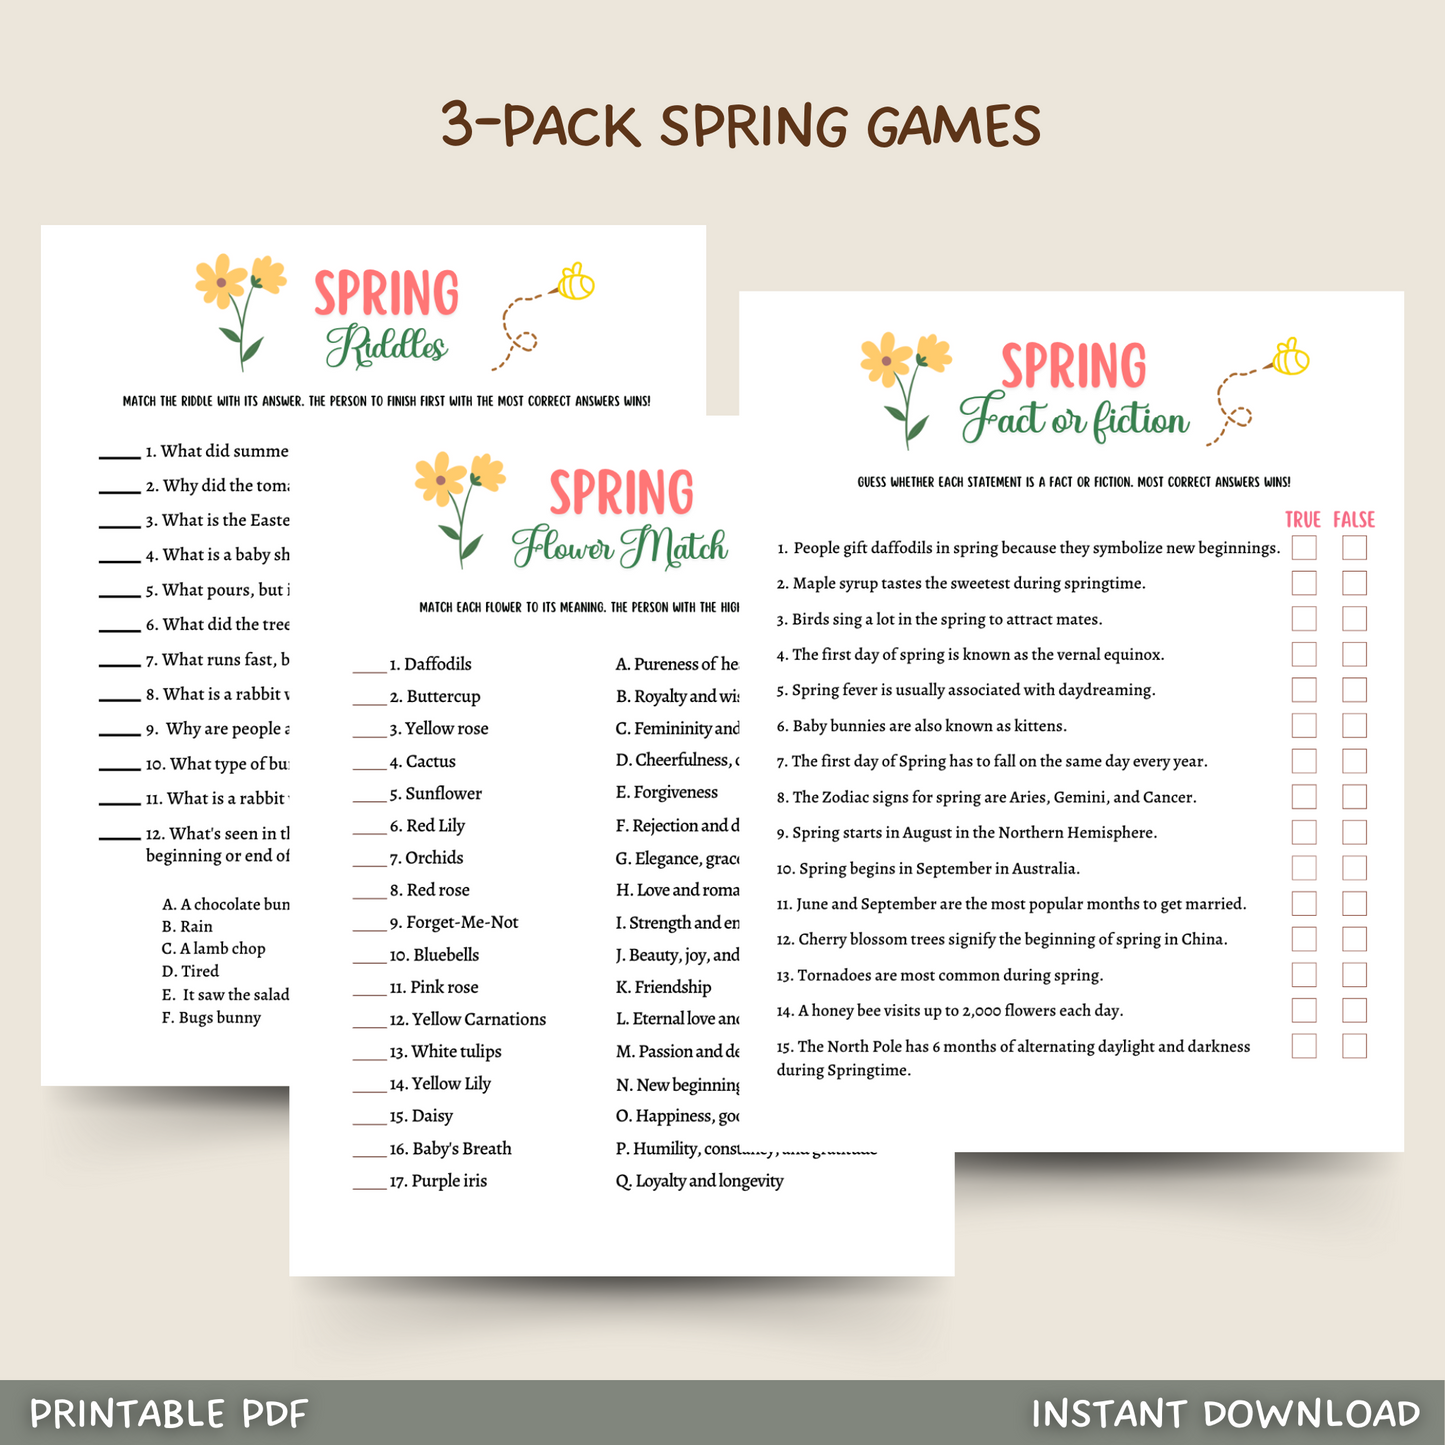 Spring Riddles Game Printable, Fact or Fiction Trivia Party Game